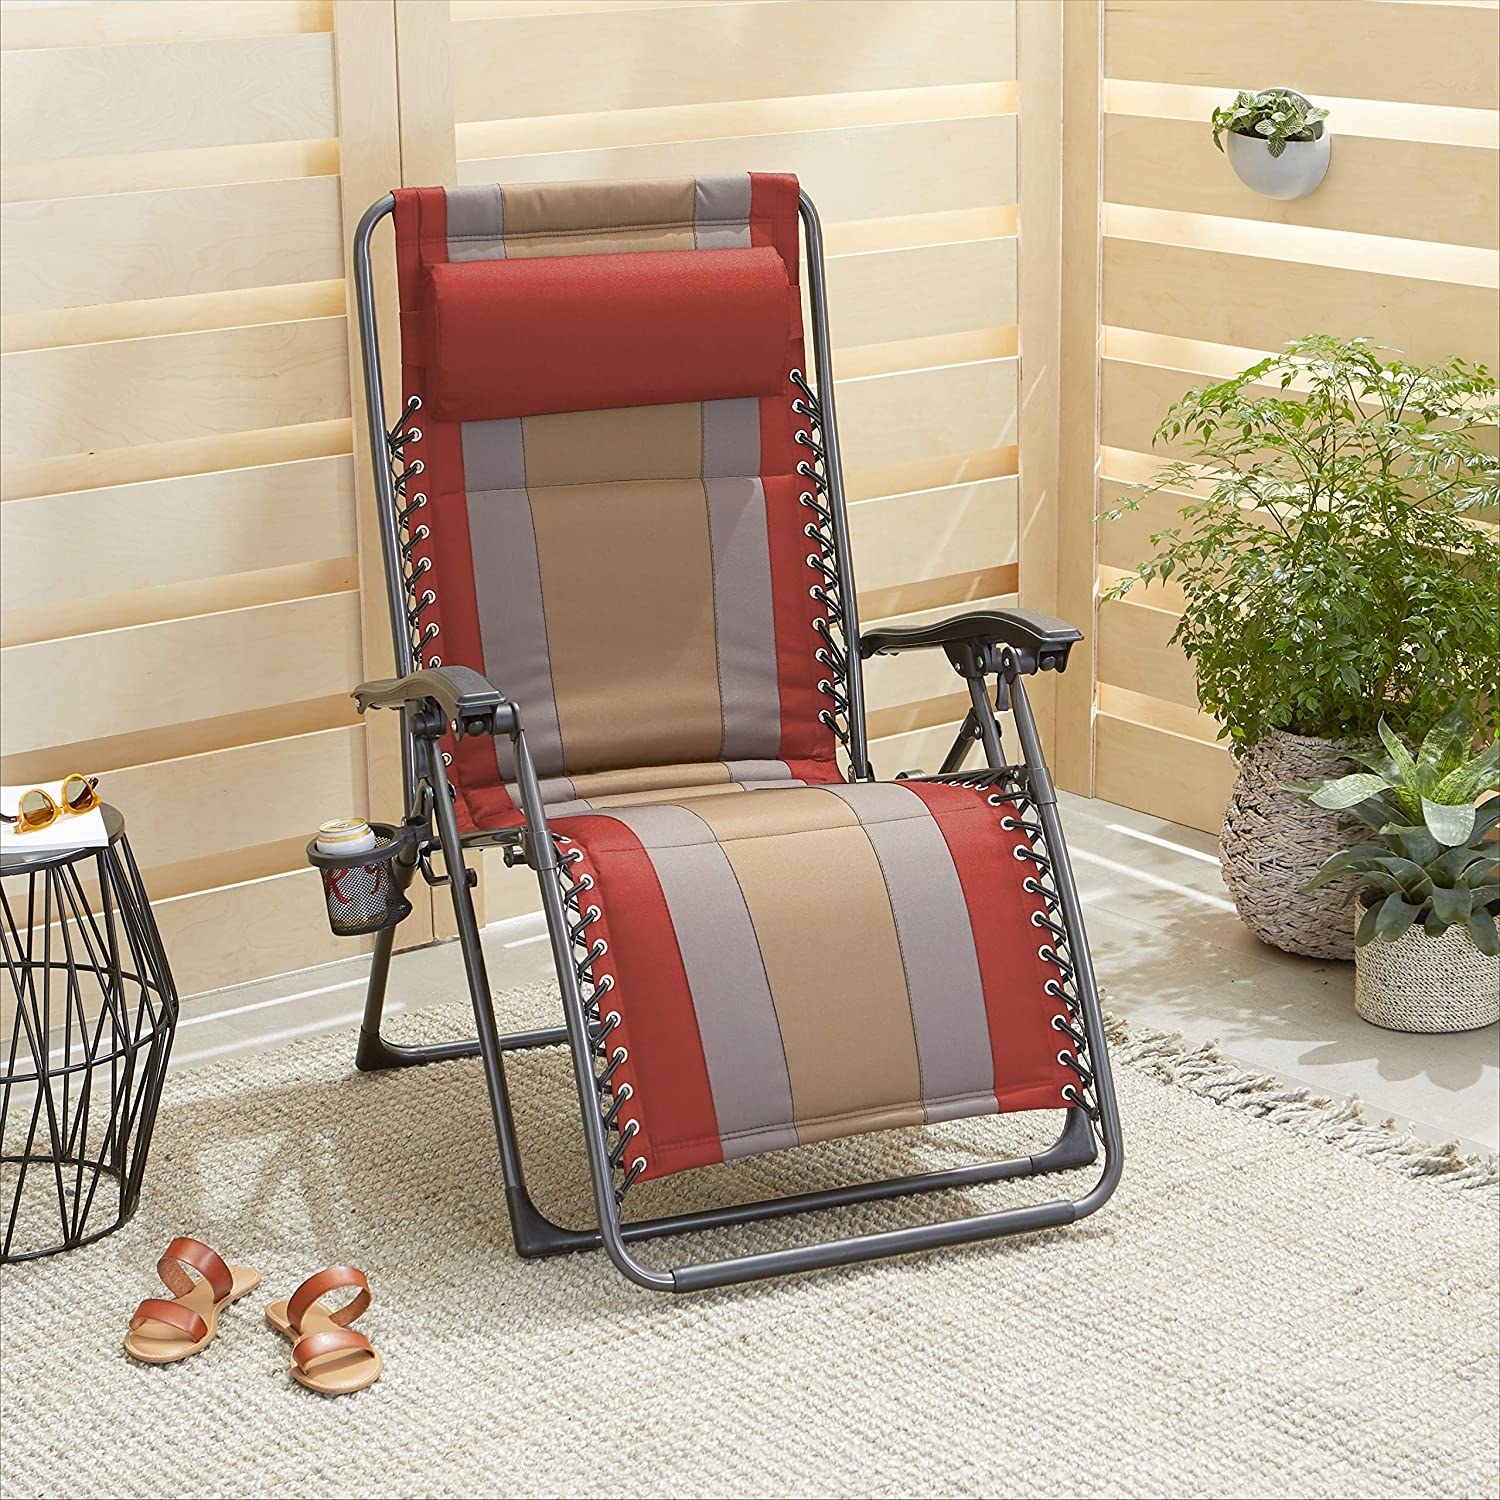 A black metal framed beach chair with red, gray, and tan cushion